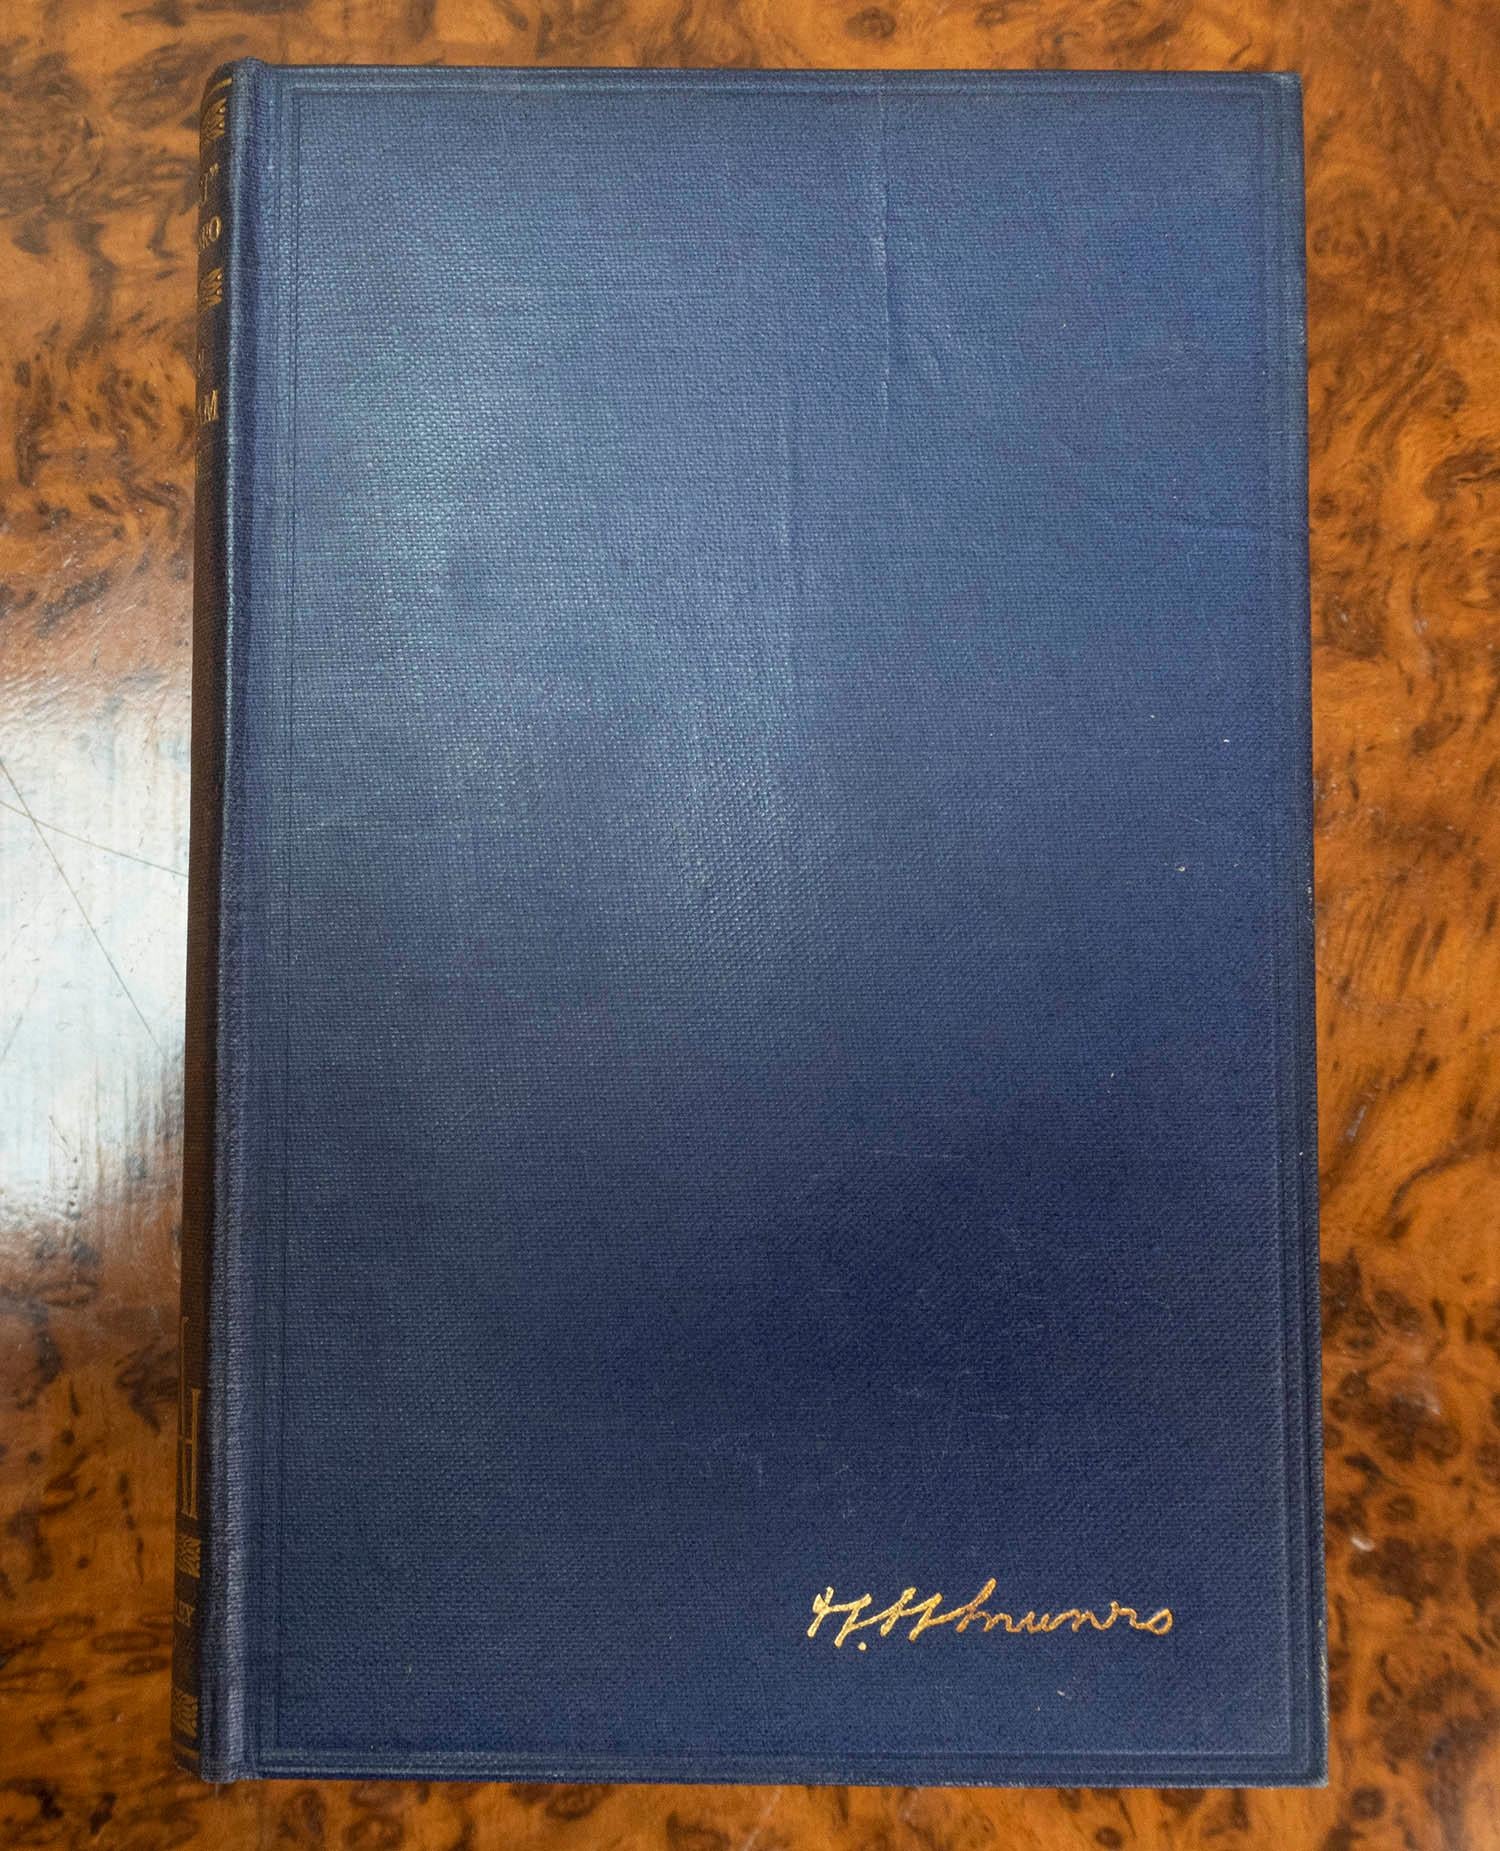 English Set of 6 Blue Cloth Bound Books. The Works of H.H Munro.